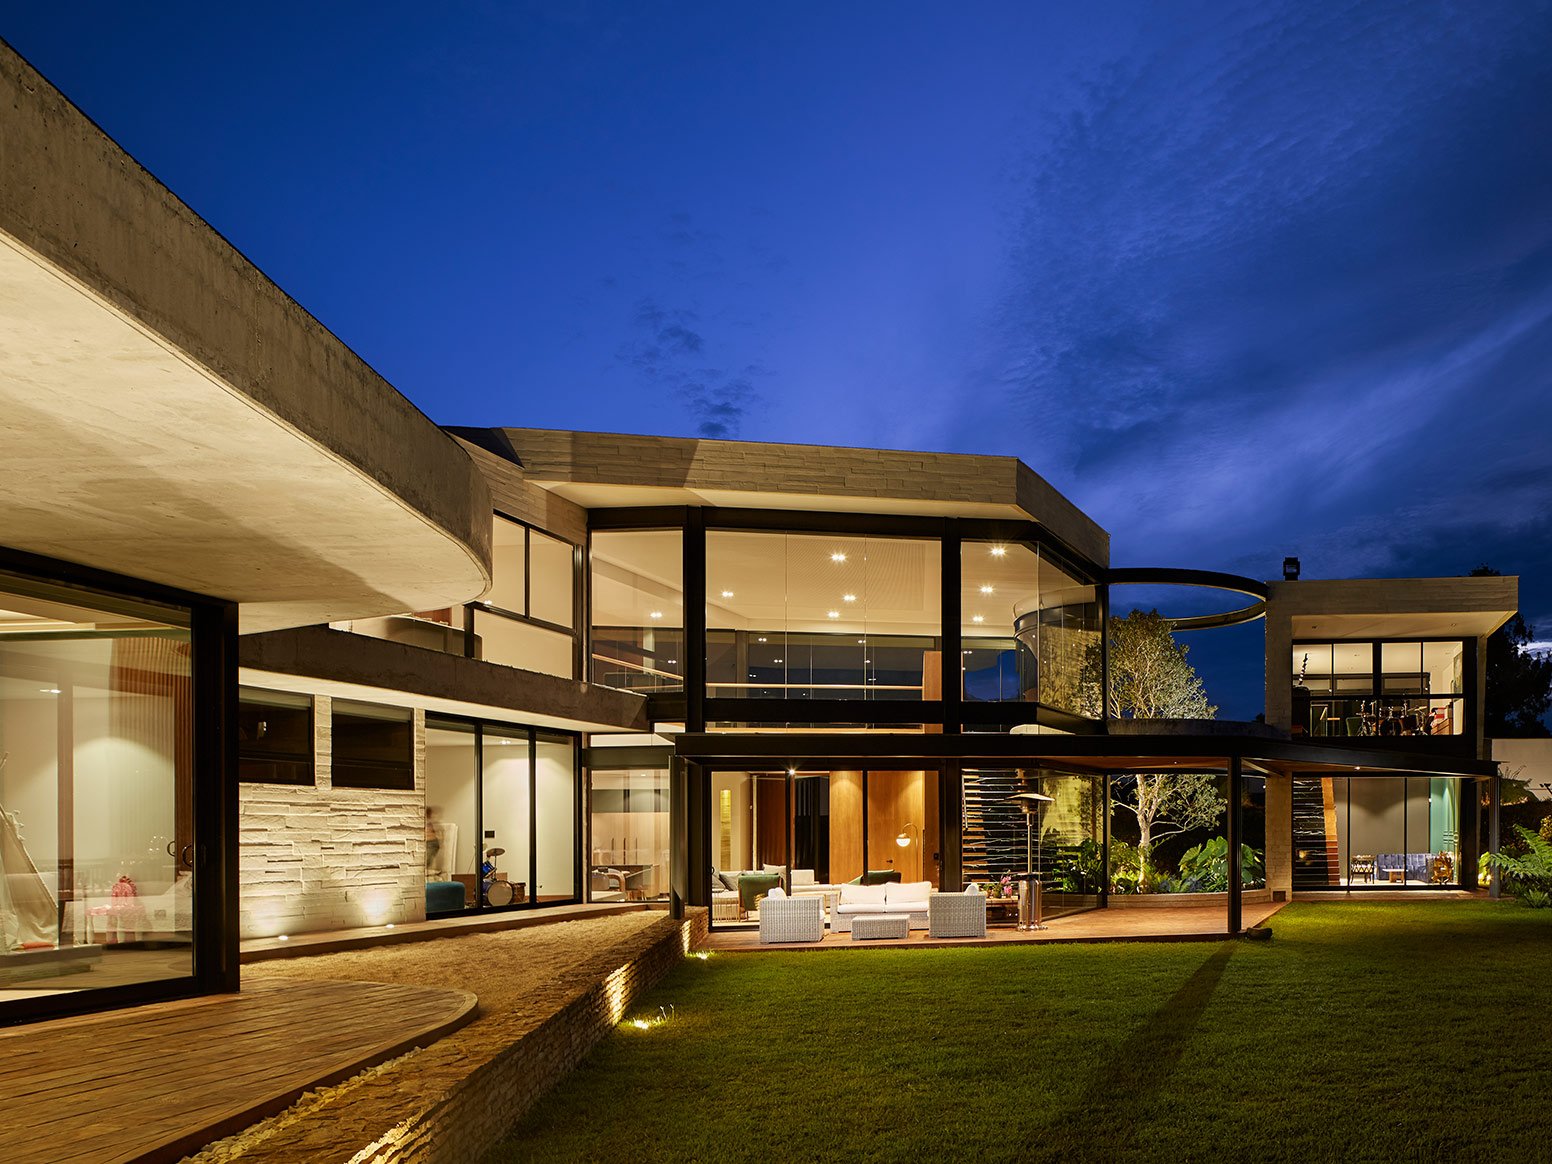 Ketra tunable led lighting indoors and outdoors of luxury home